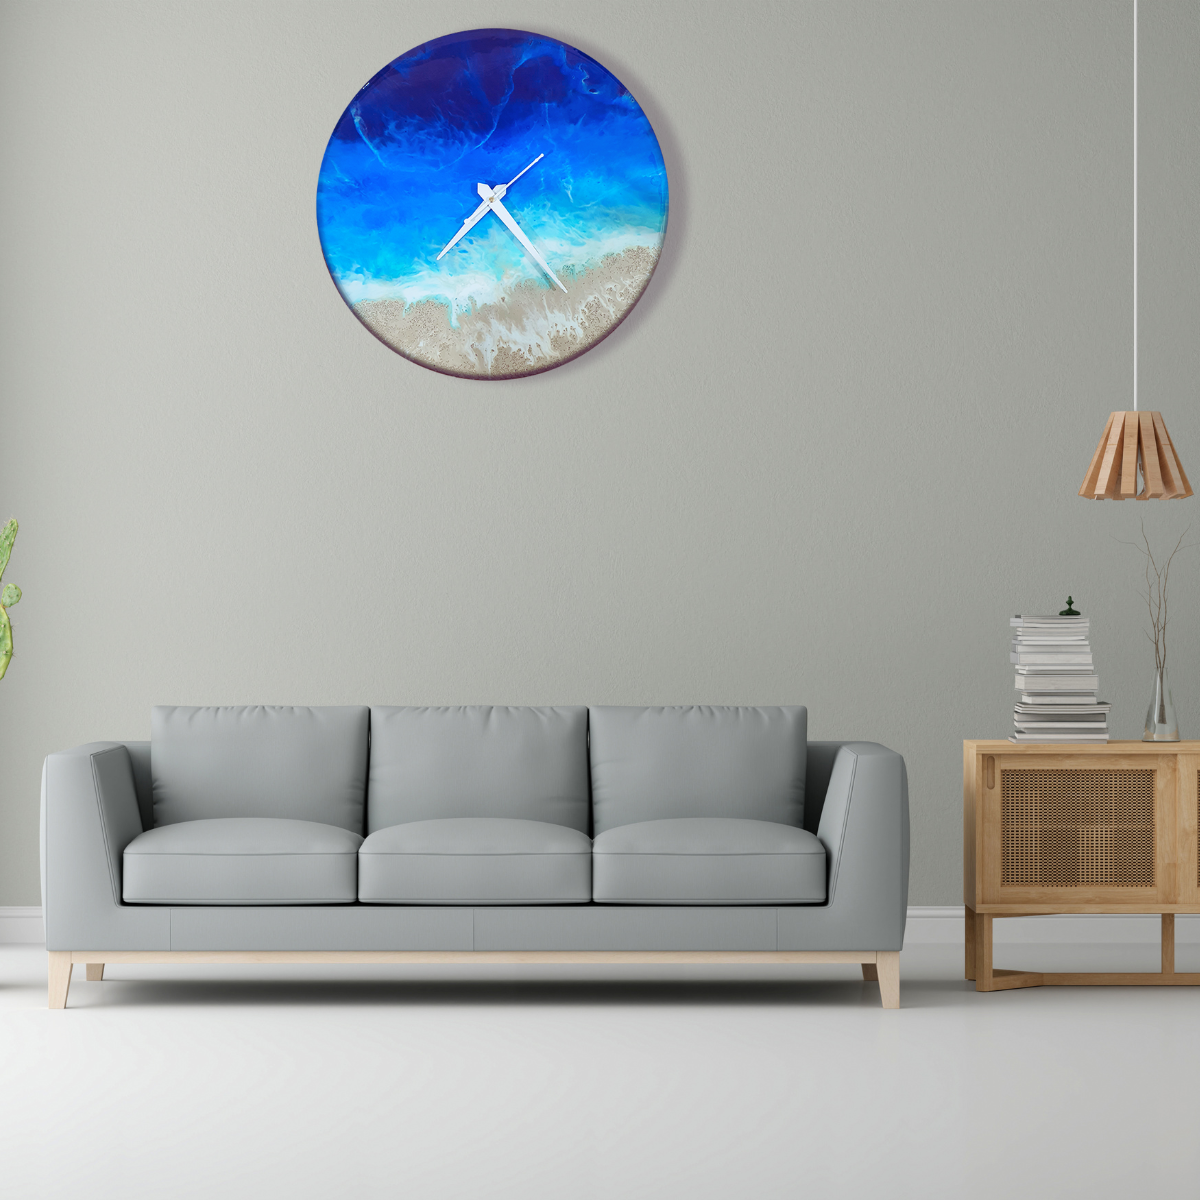 Ocean Theme with White Needle Resin 14 Inch Wall Clock, Resin Wall Clock, Clock, Premium Wall Clock, Epoxy Wall Clock